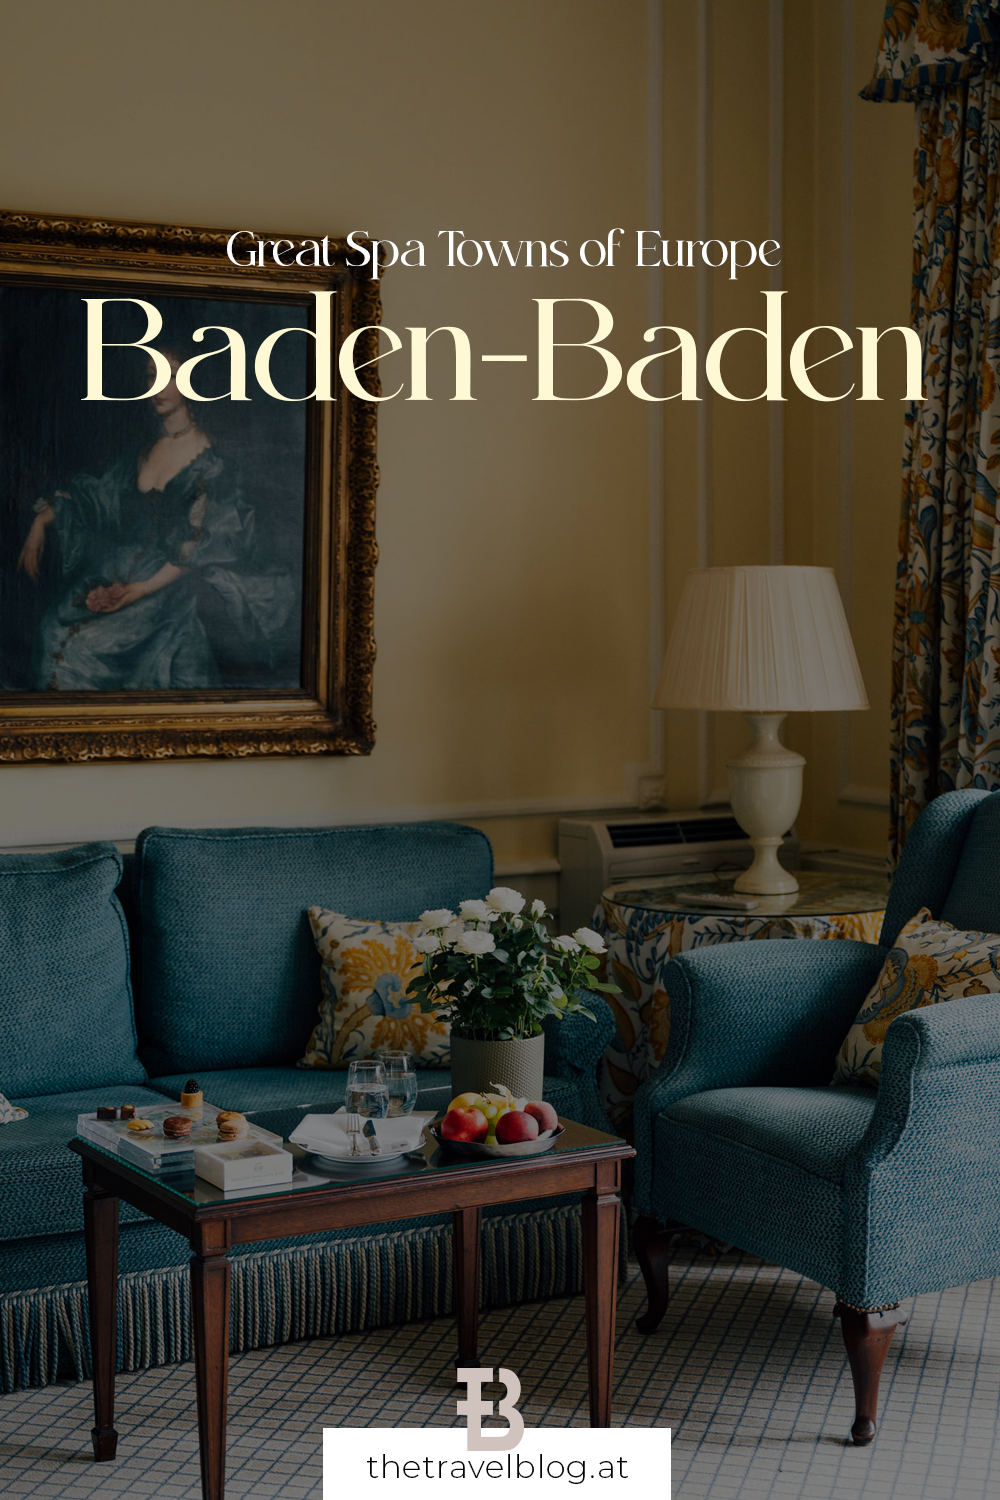 Great Spa towns of Europe: An exploration and tips for Baden-Baden in Germany